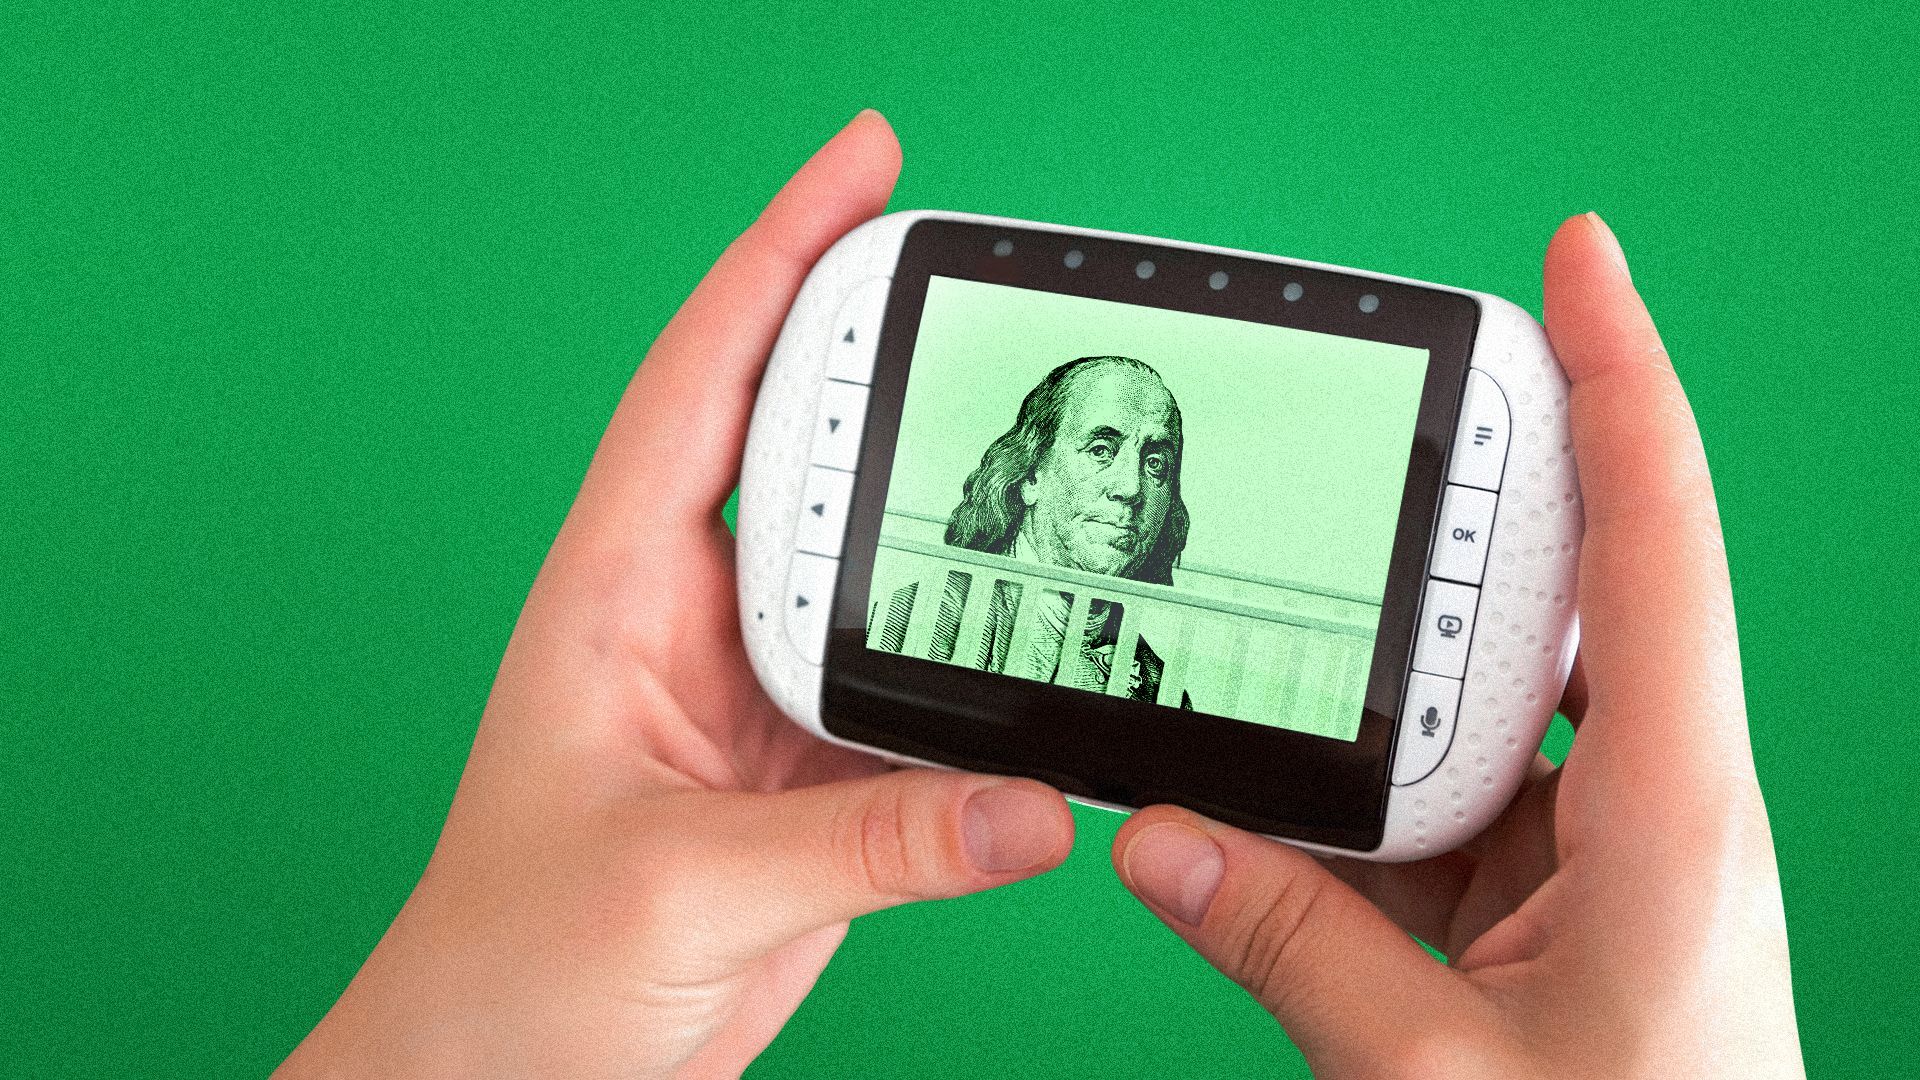 an illustration of hands holding a baby monitor and the screen is displaying ben franklin inside of a crib